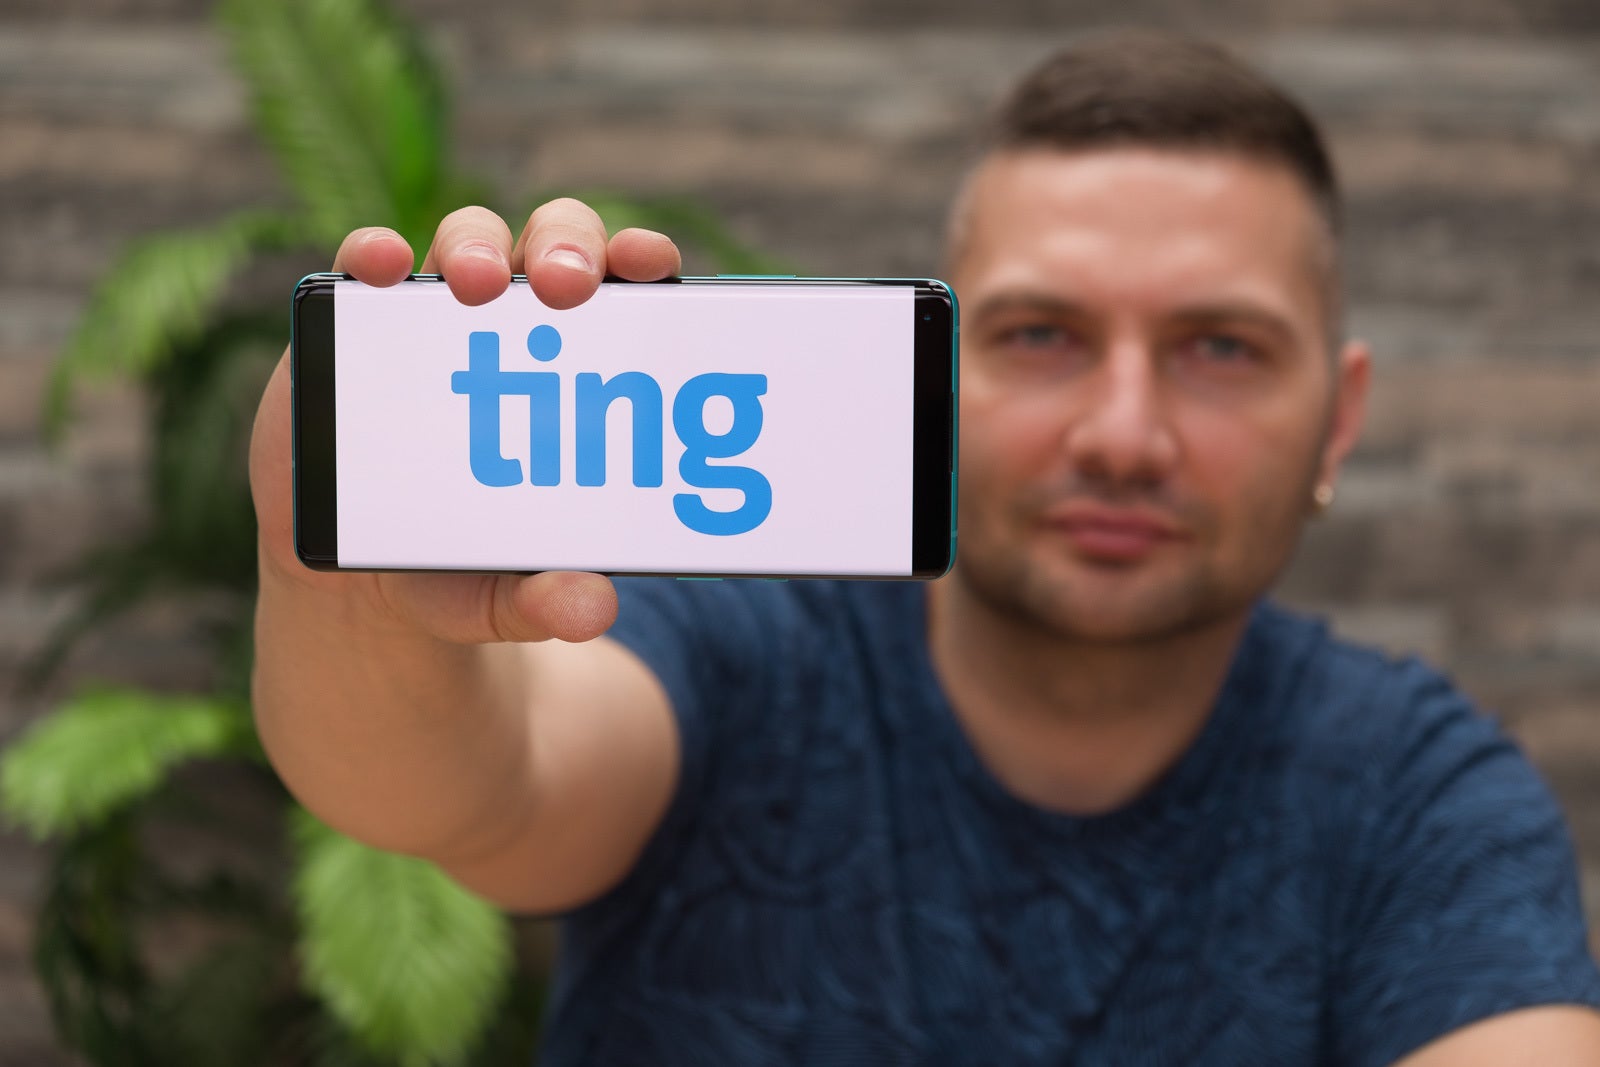 Ting Mobile wants to break you away from the shackles of big carriers, gives you $25 credit to try it